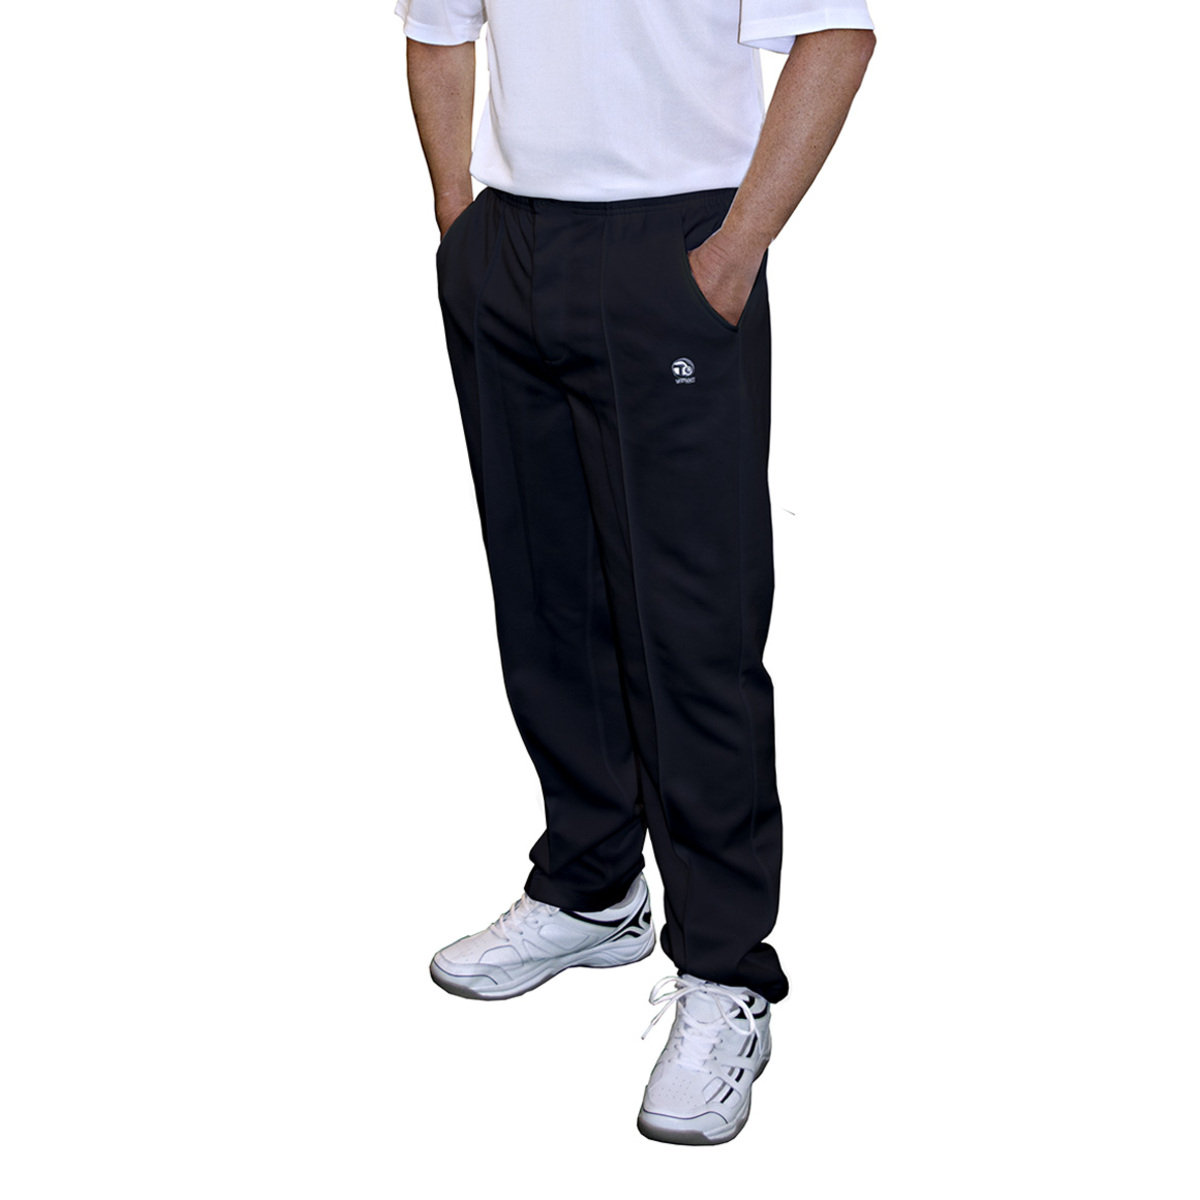 Buy White Trousers & Pants for Men by hangup Online | Ajio.com